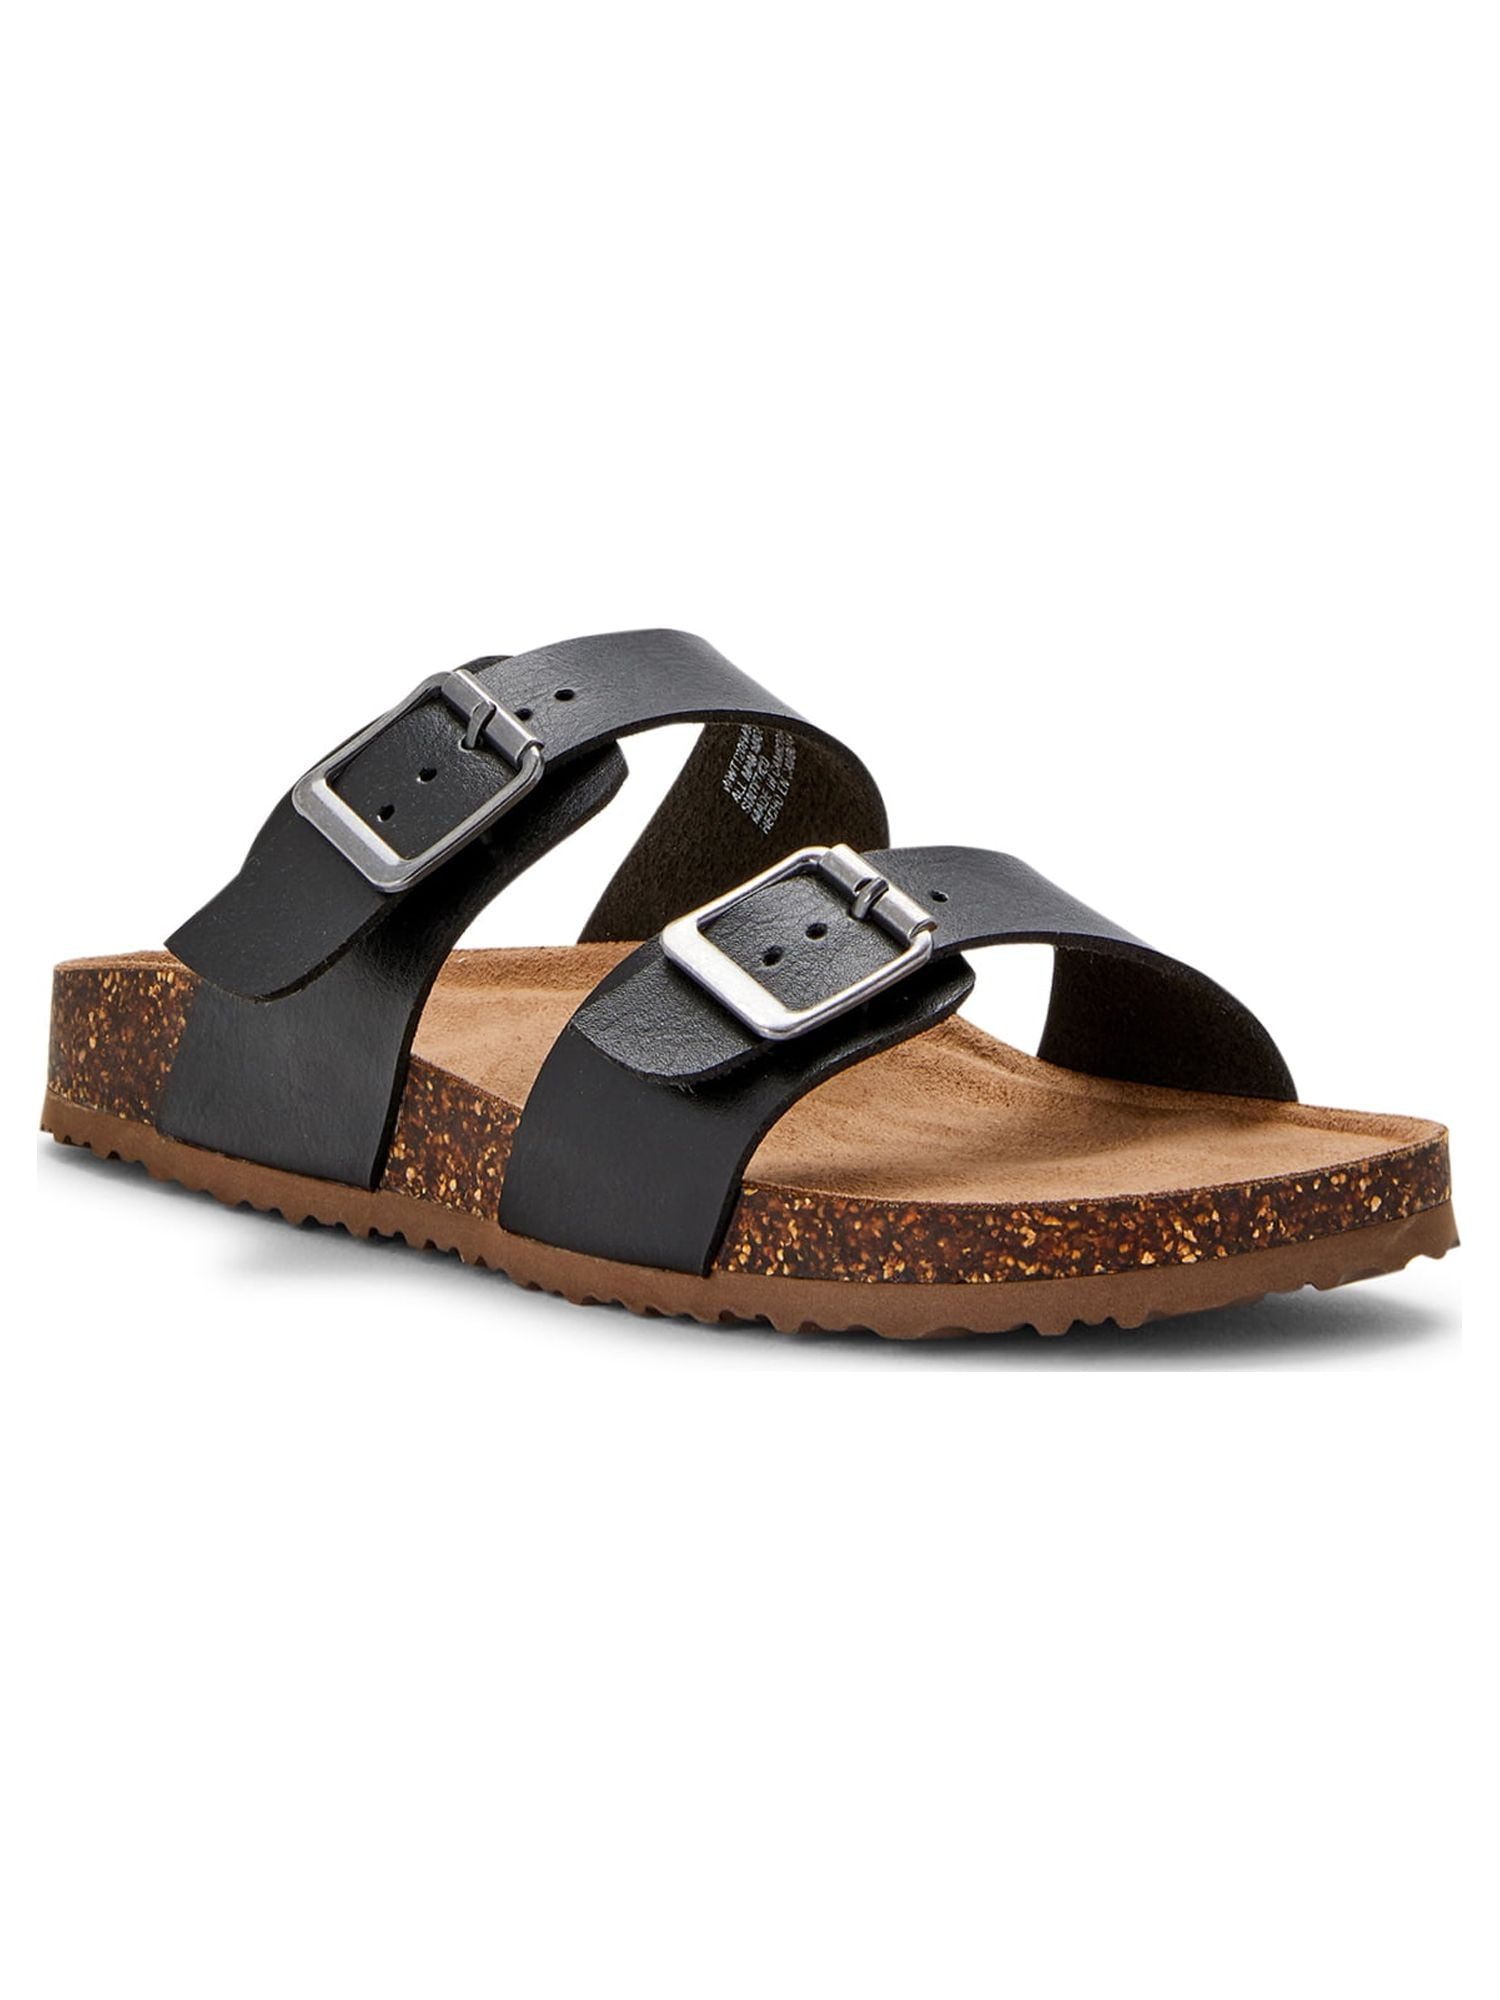 Time and Tru Women's Two Band Slide Sandals - Walmart.com